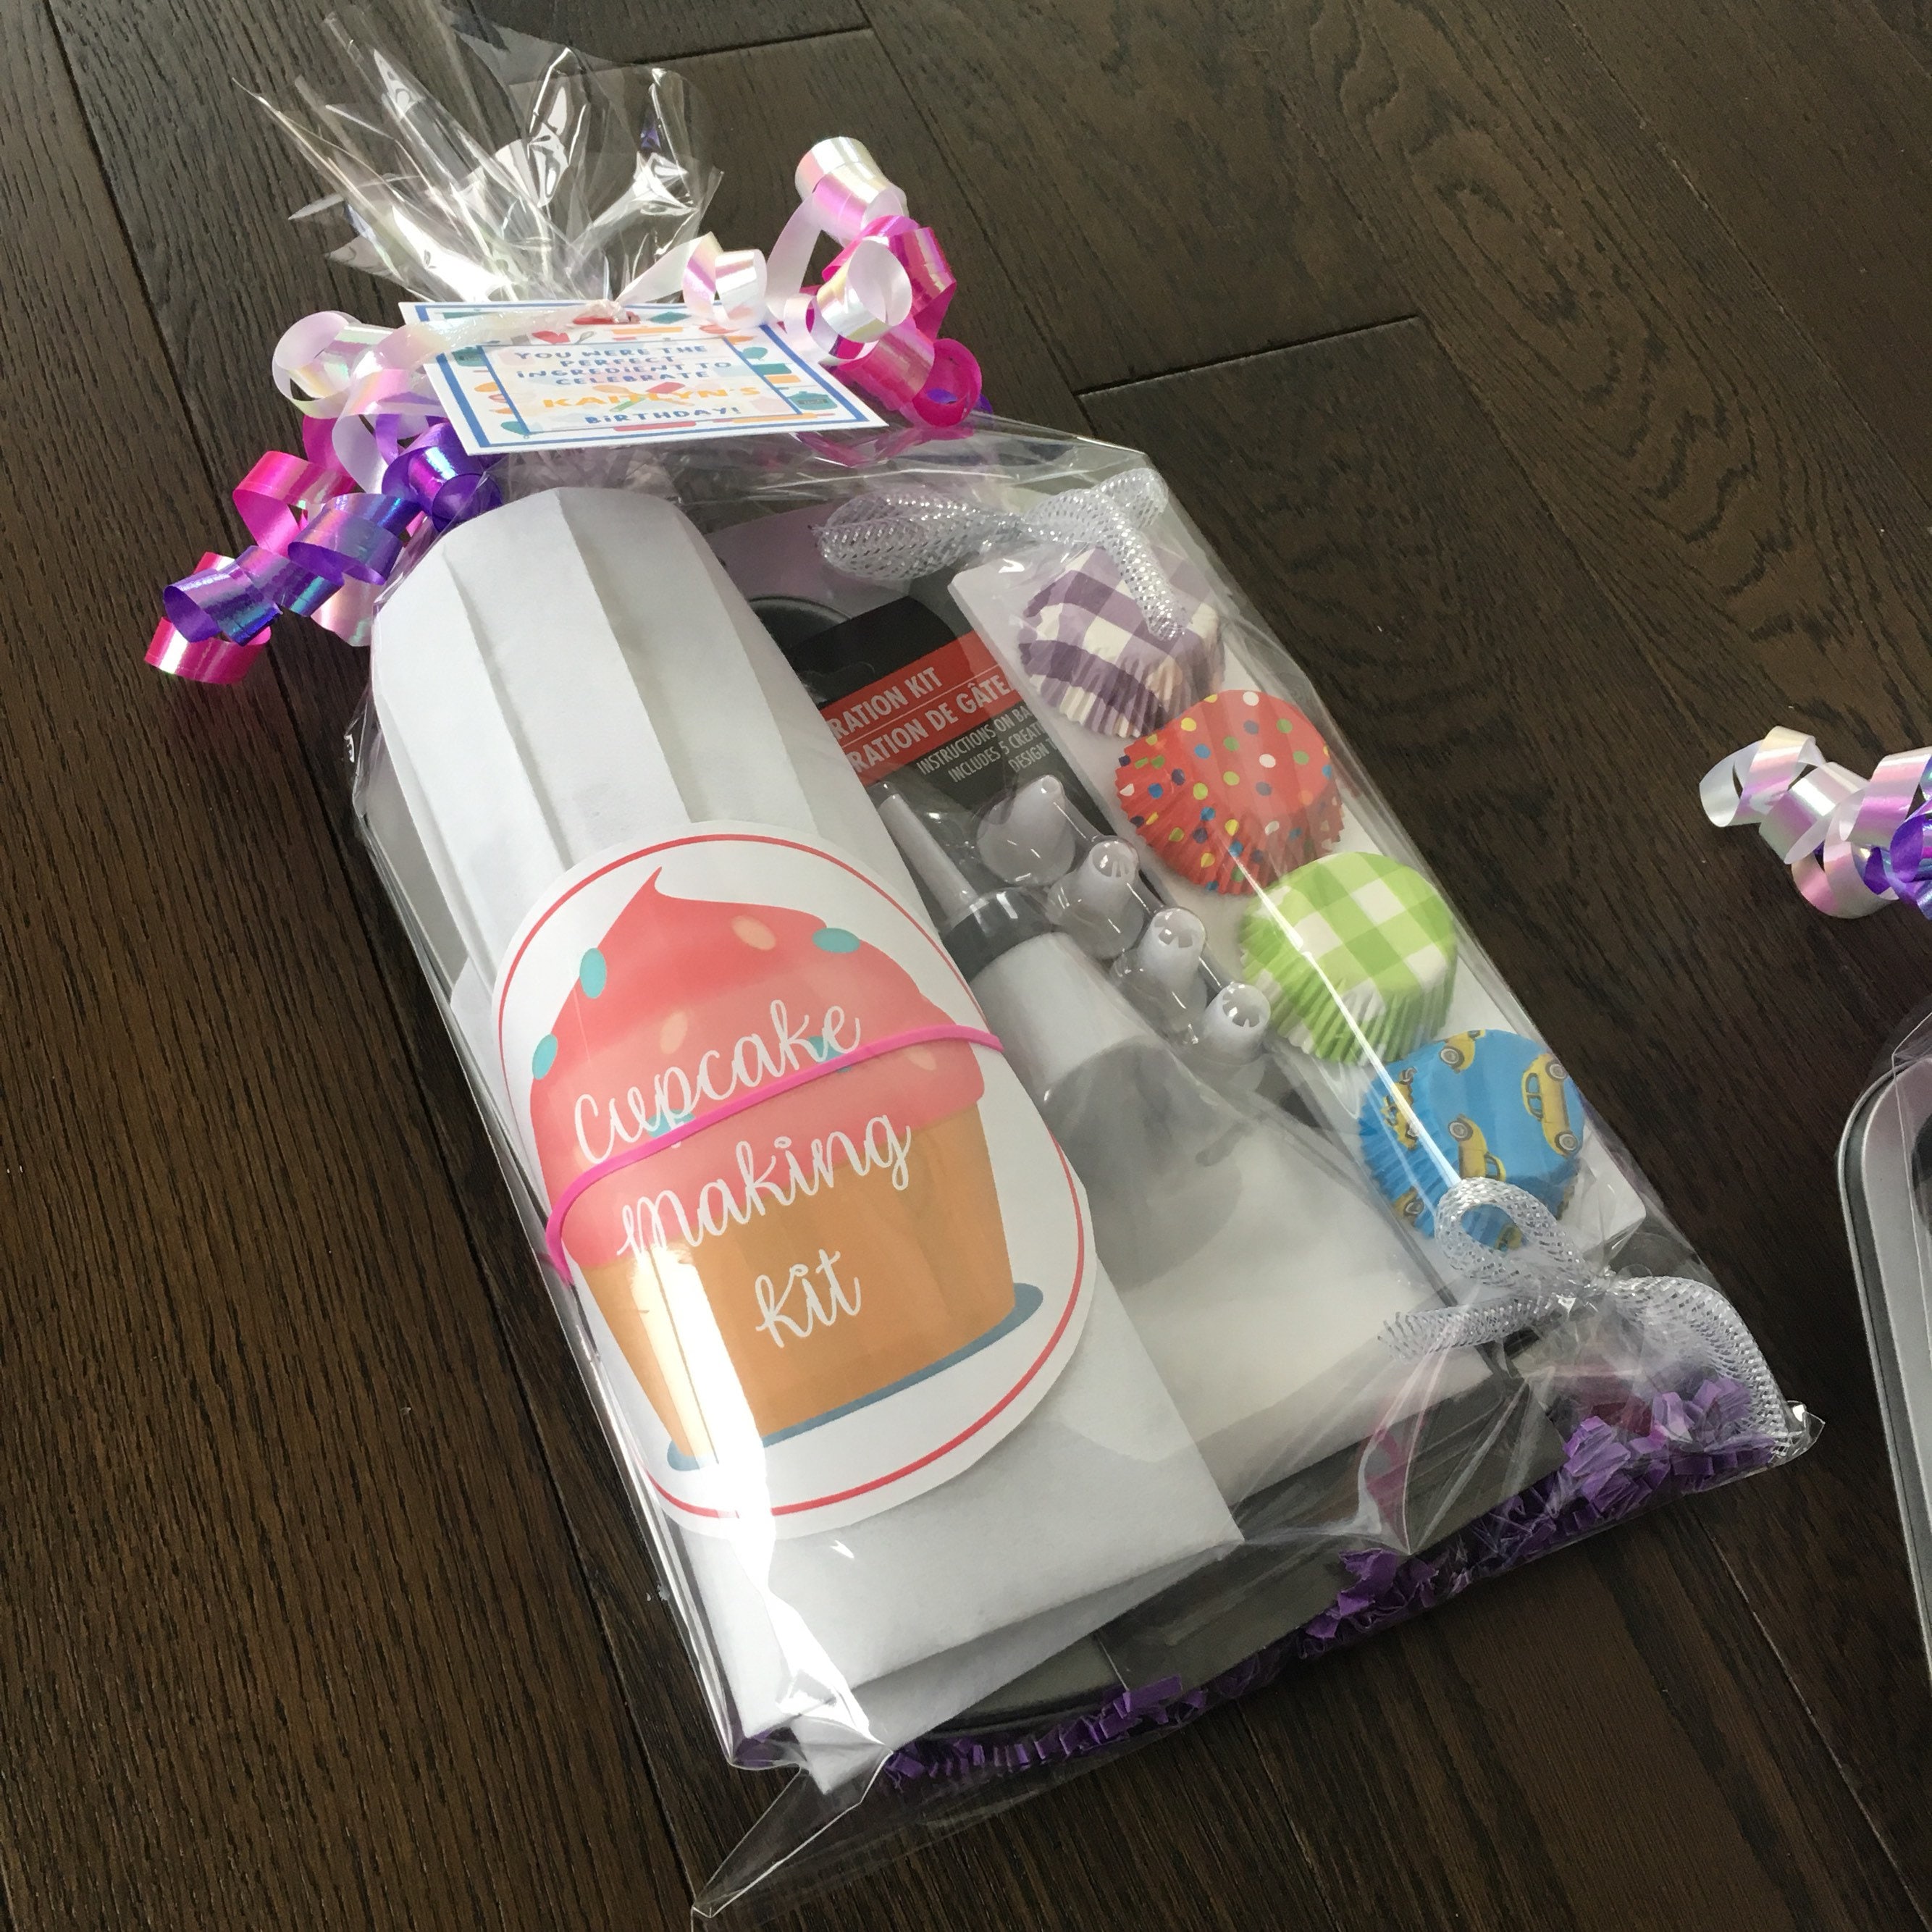 Race Car Birthday Favors - Thanks for Racing over to my party! - with  Handmade Car Shaped Crayon - Customizable with childs name!